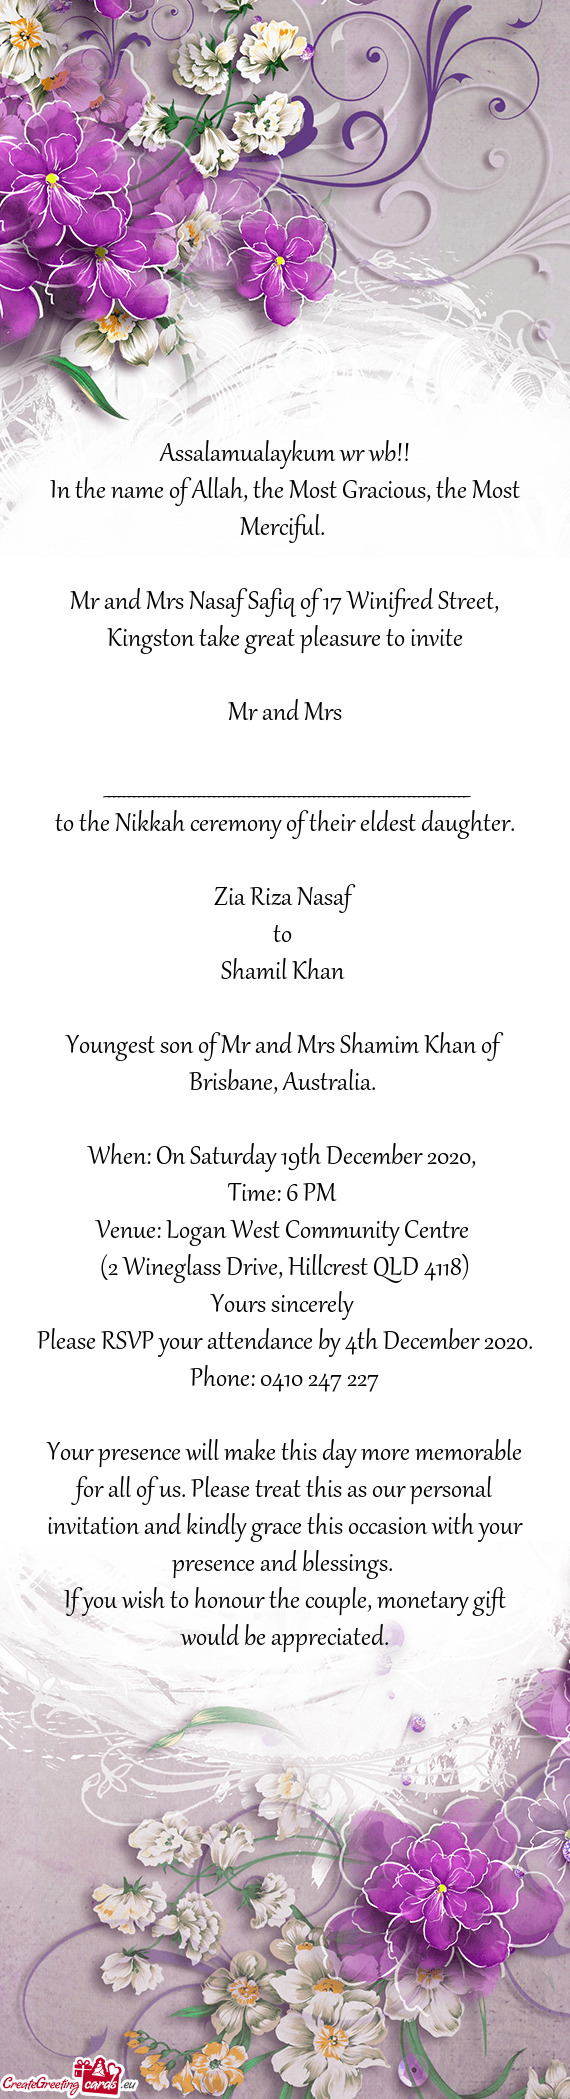 To the Nikkah ceremony of their eldest daughter